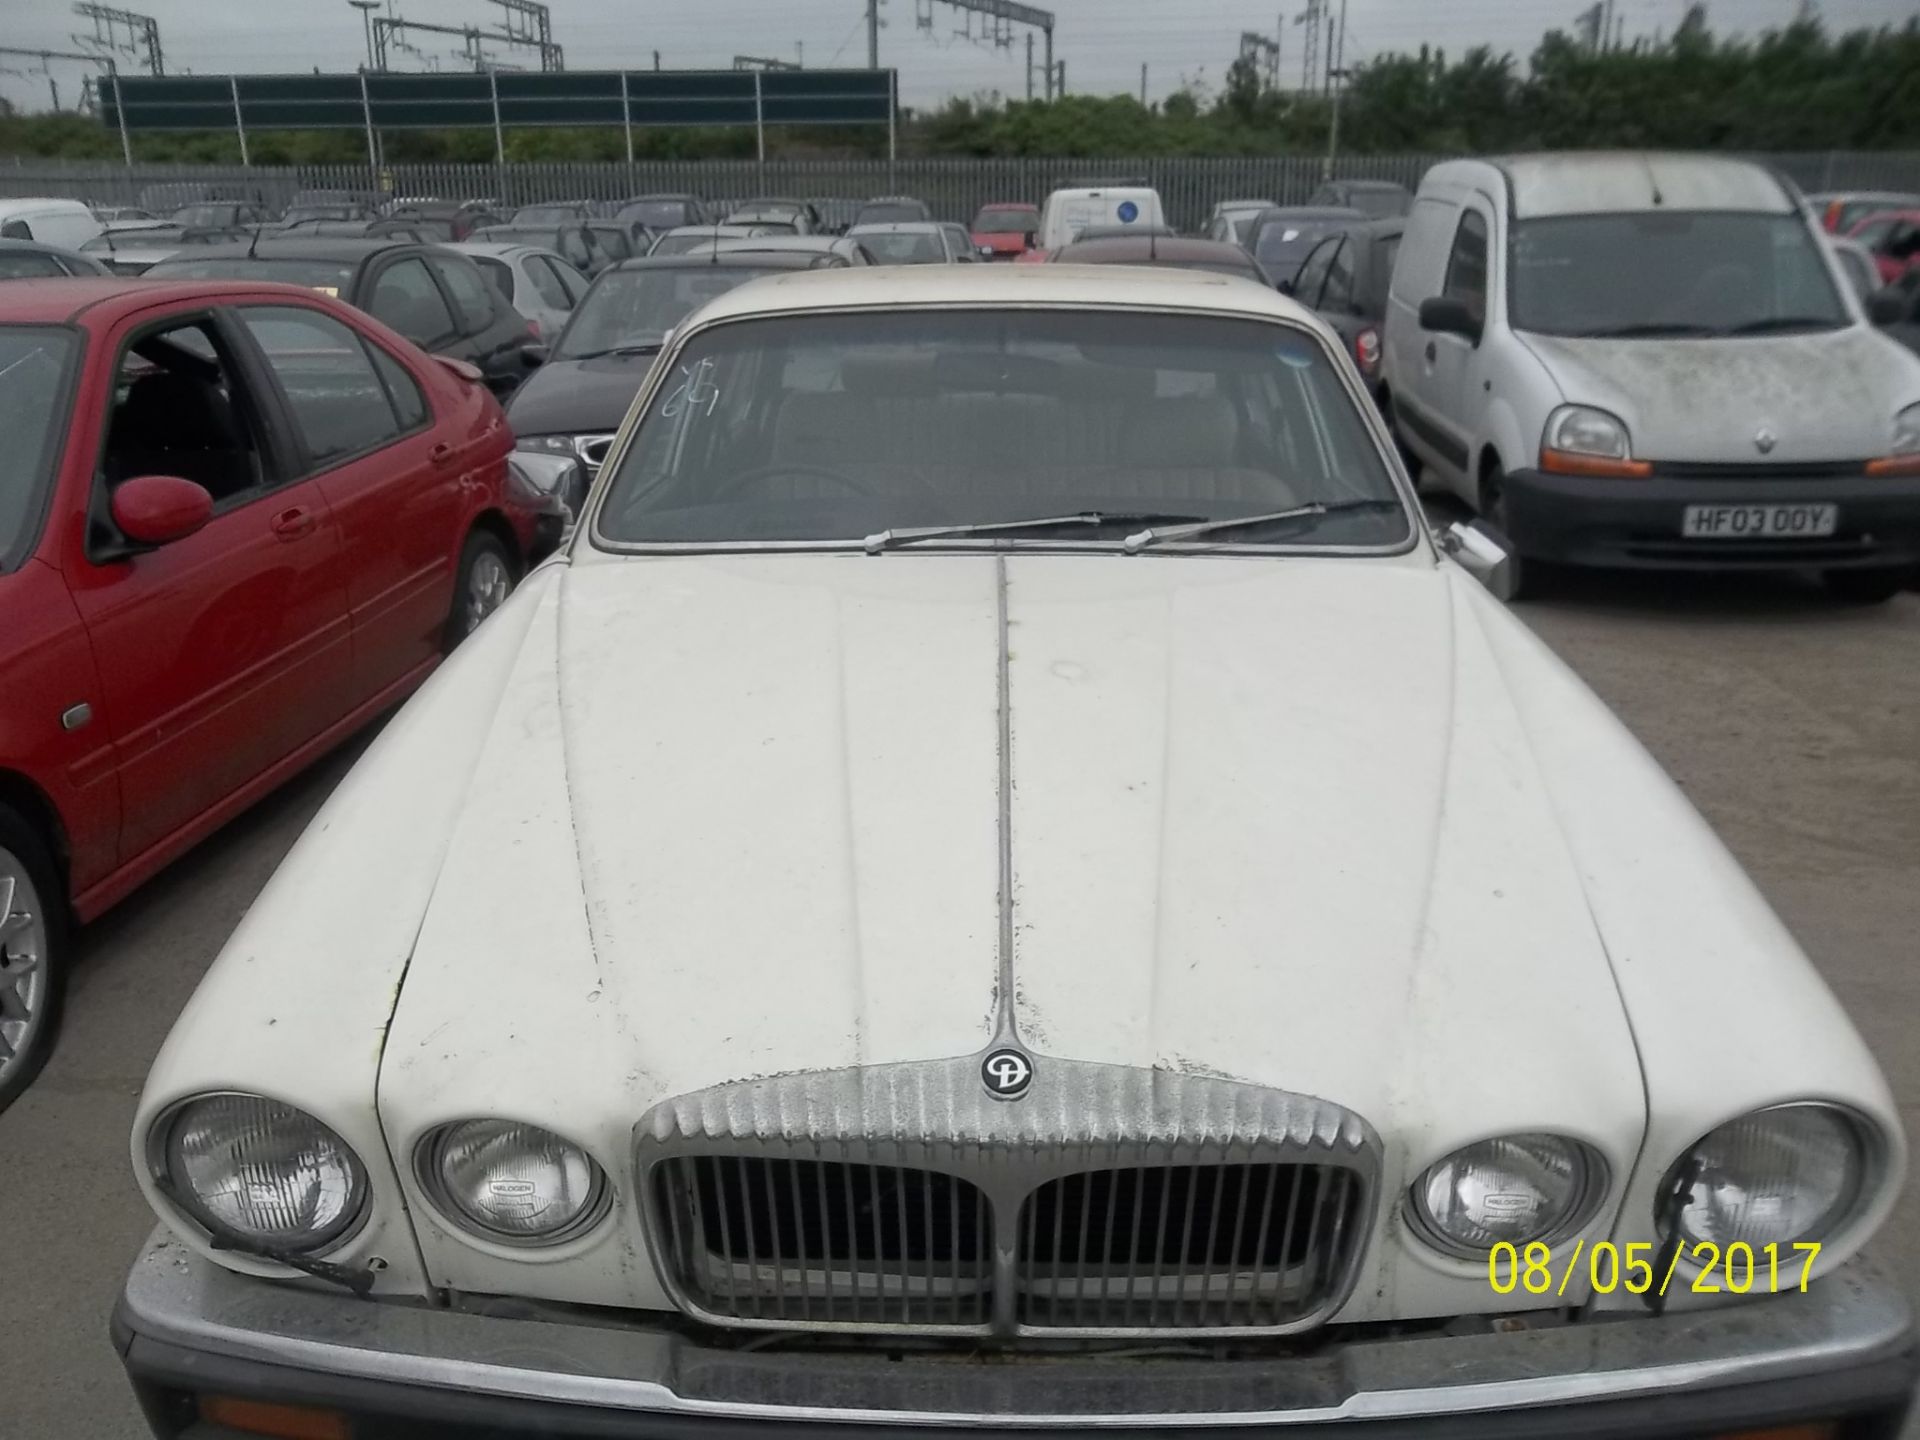 Daimler 4.2 Sovereign - 100 OP Date of registration: 01.01.1980 4235cc, petrol, automatic, white